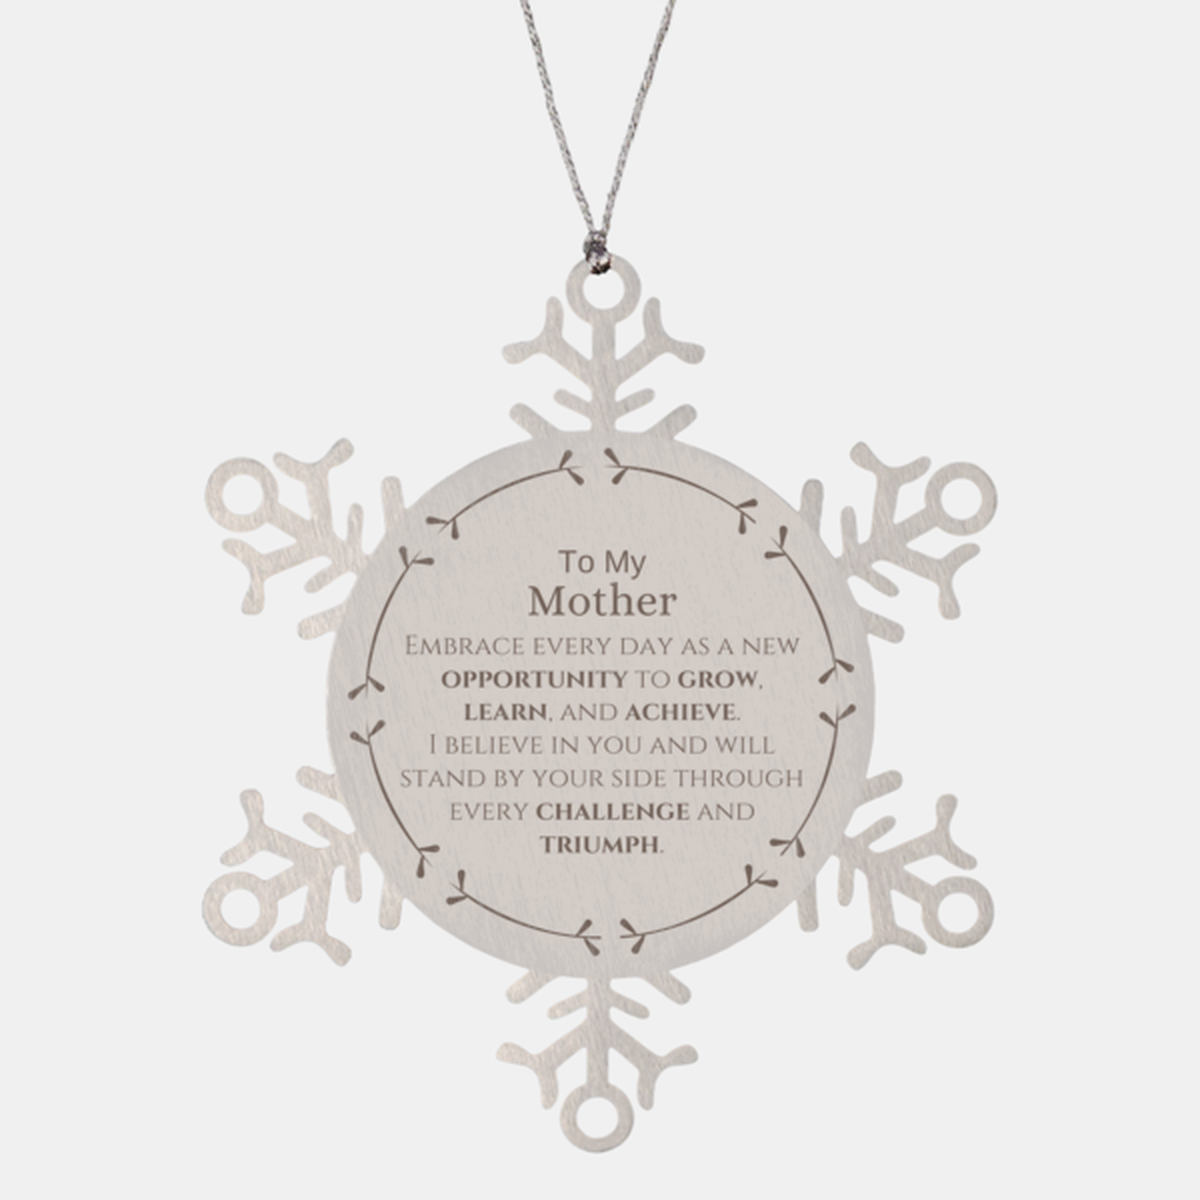 To My Mother Gifts, I believe in you and will stand by your side, Inspirational Snowflake Ornament For Mother, Birthday Christmas Motivational Mother Gifts